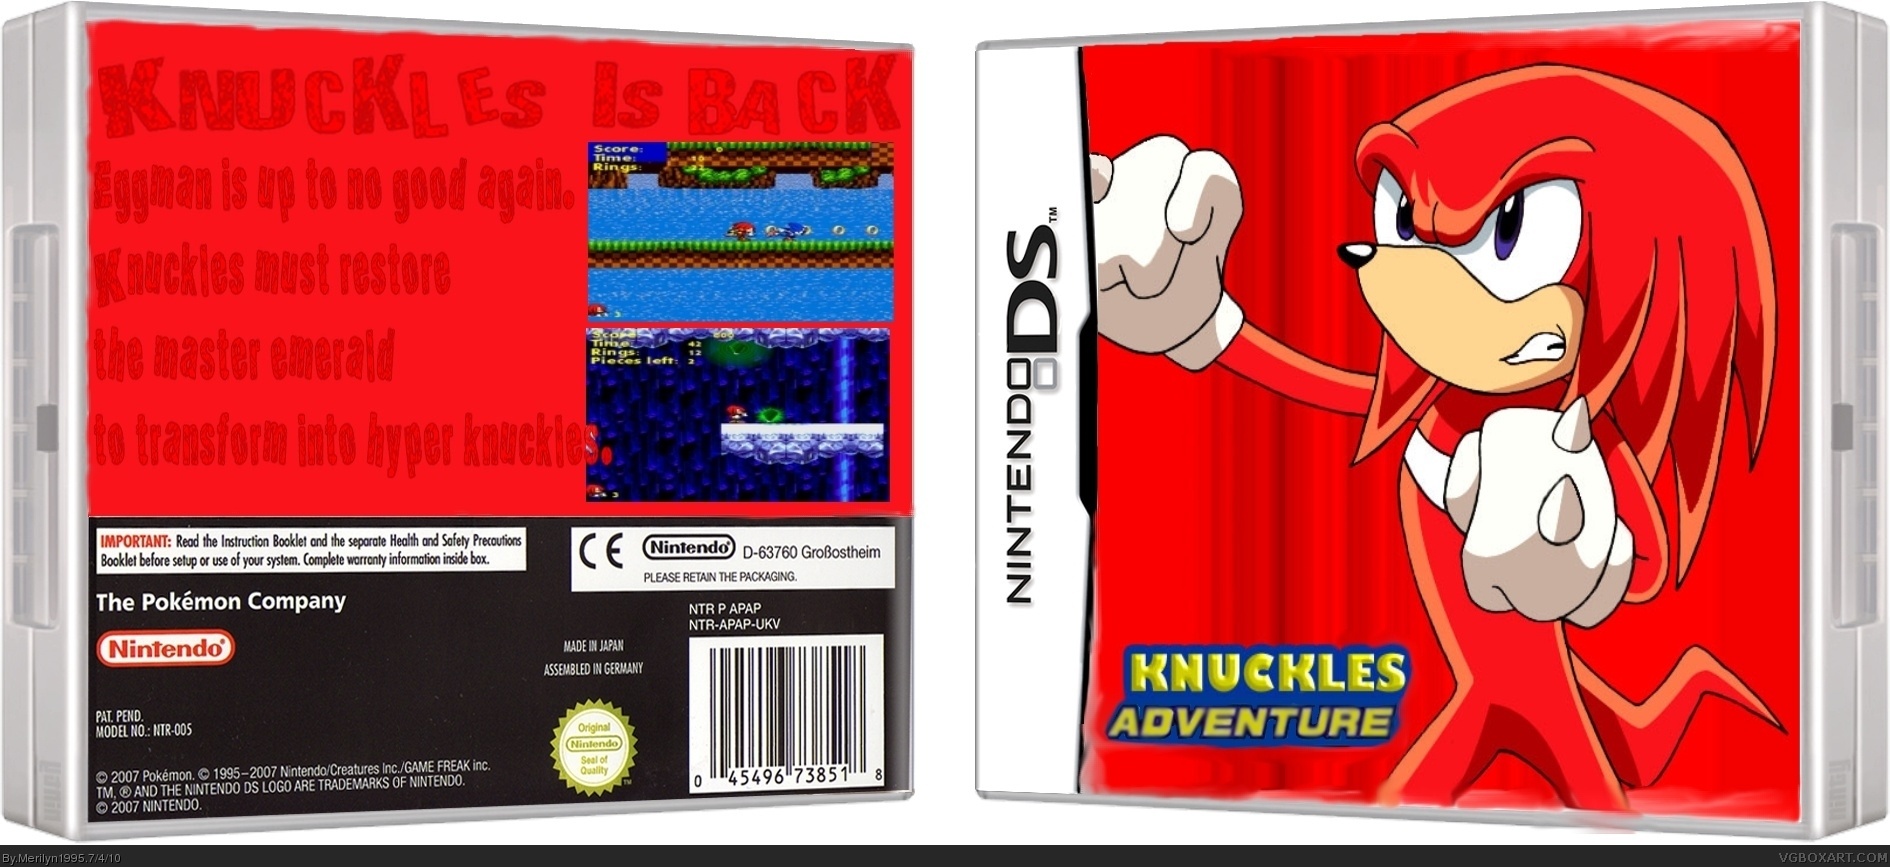 Knuckles adventure box cover